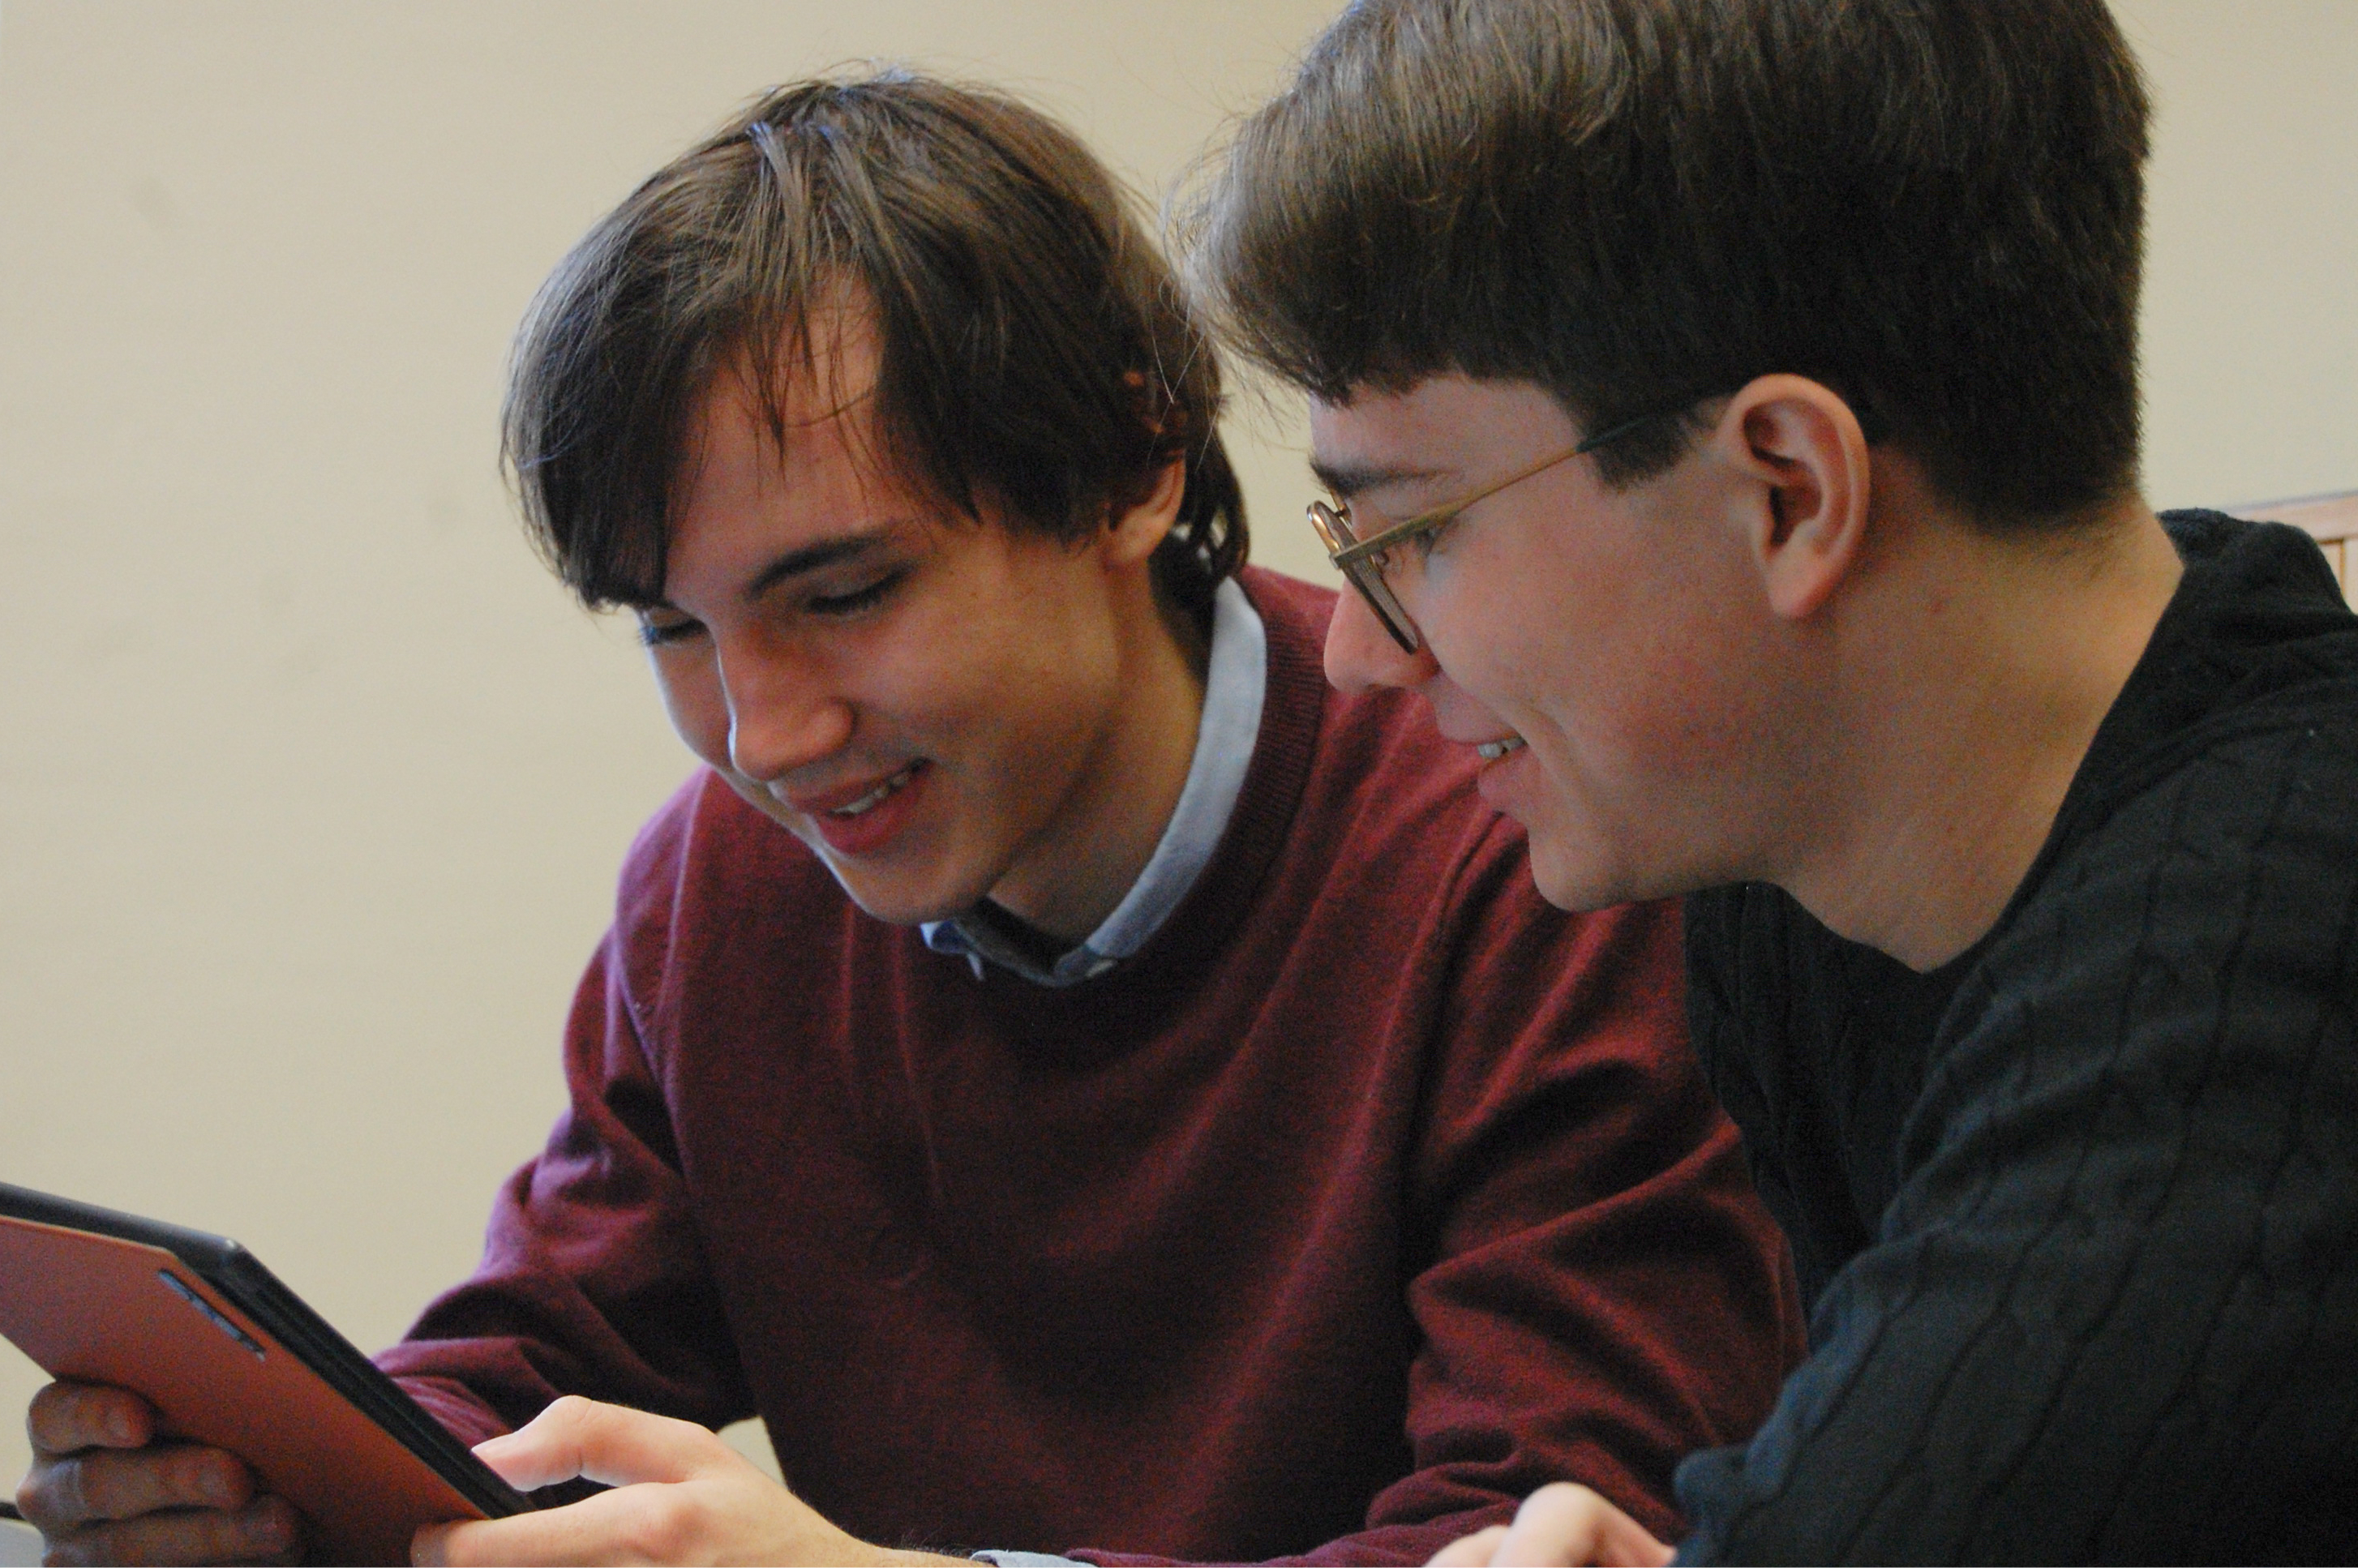 Two young smiling men looking at an e-book reader.